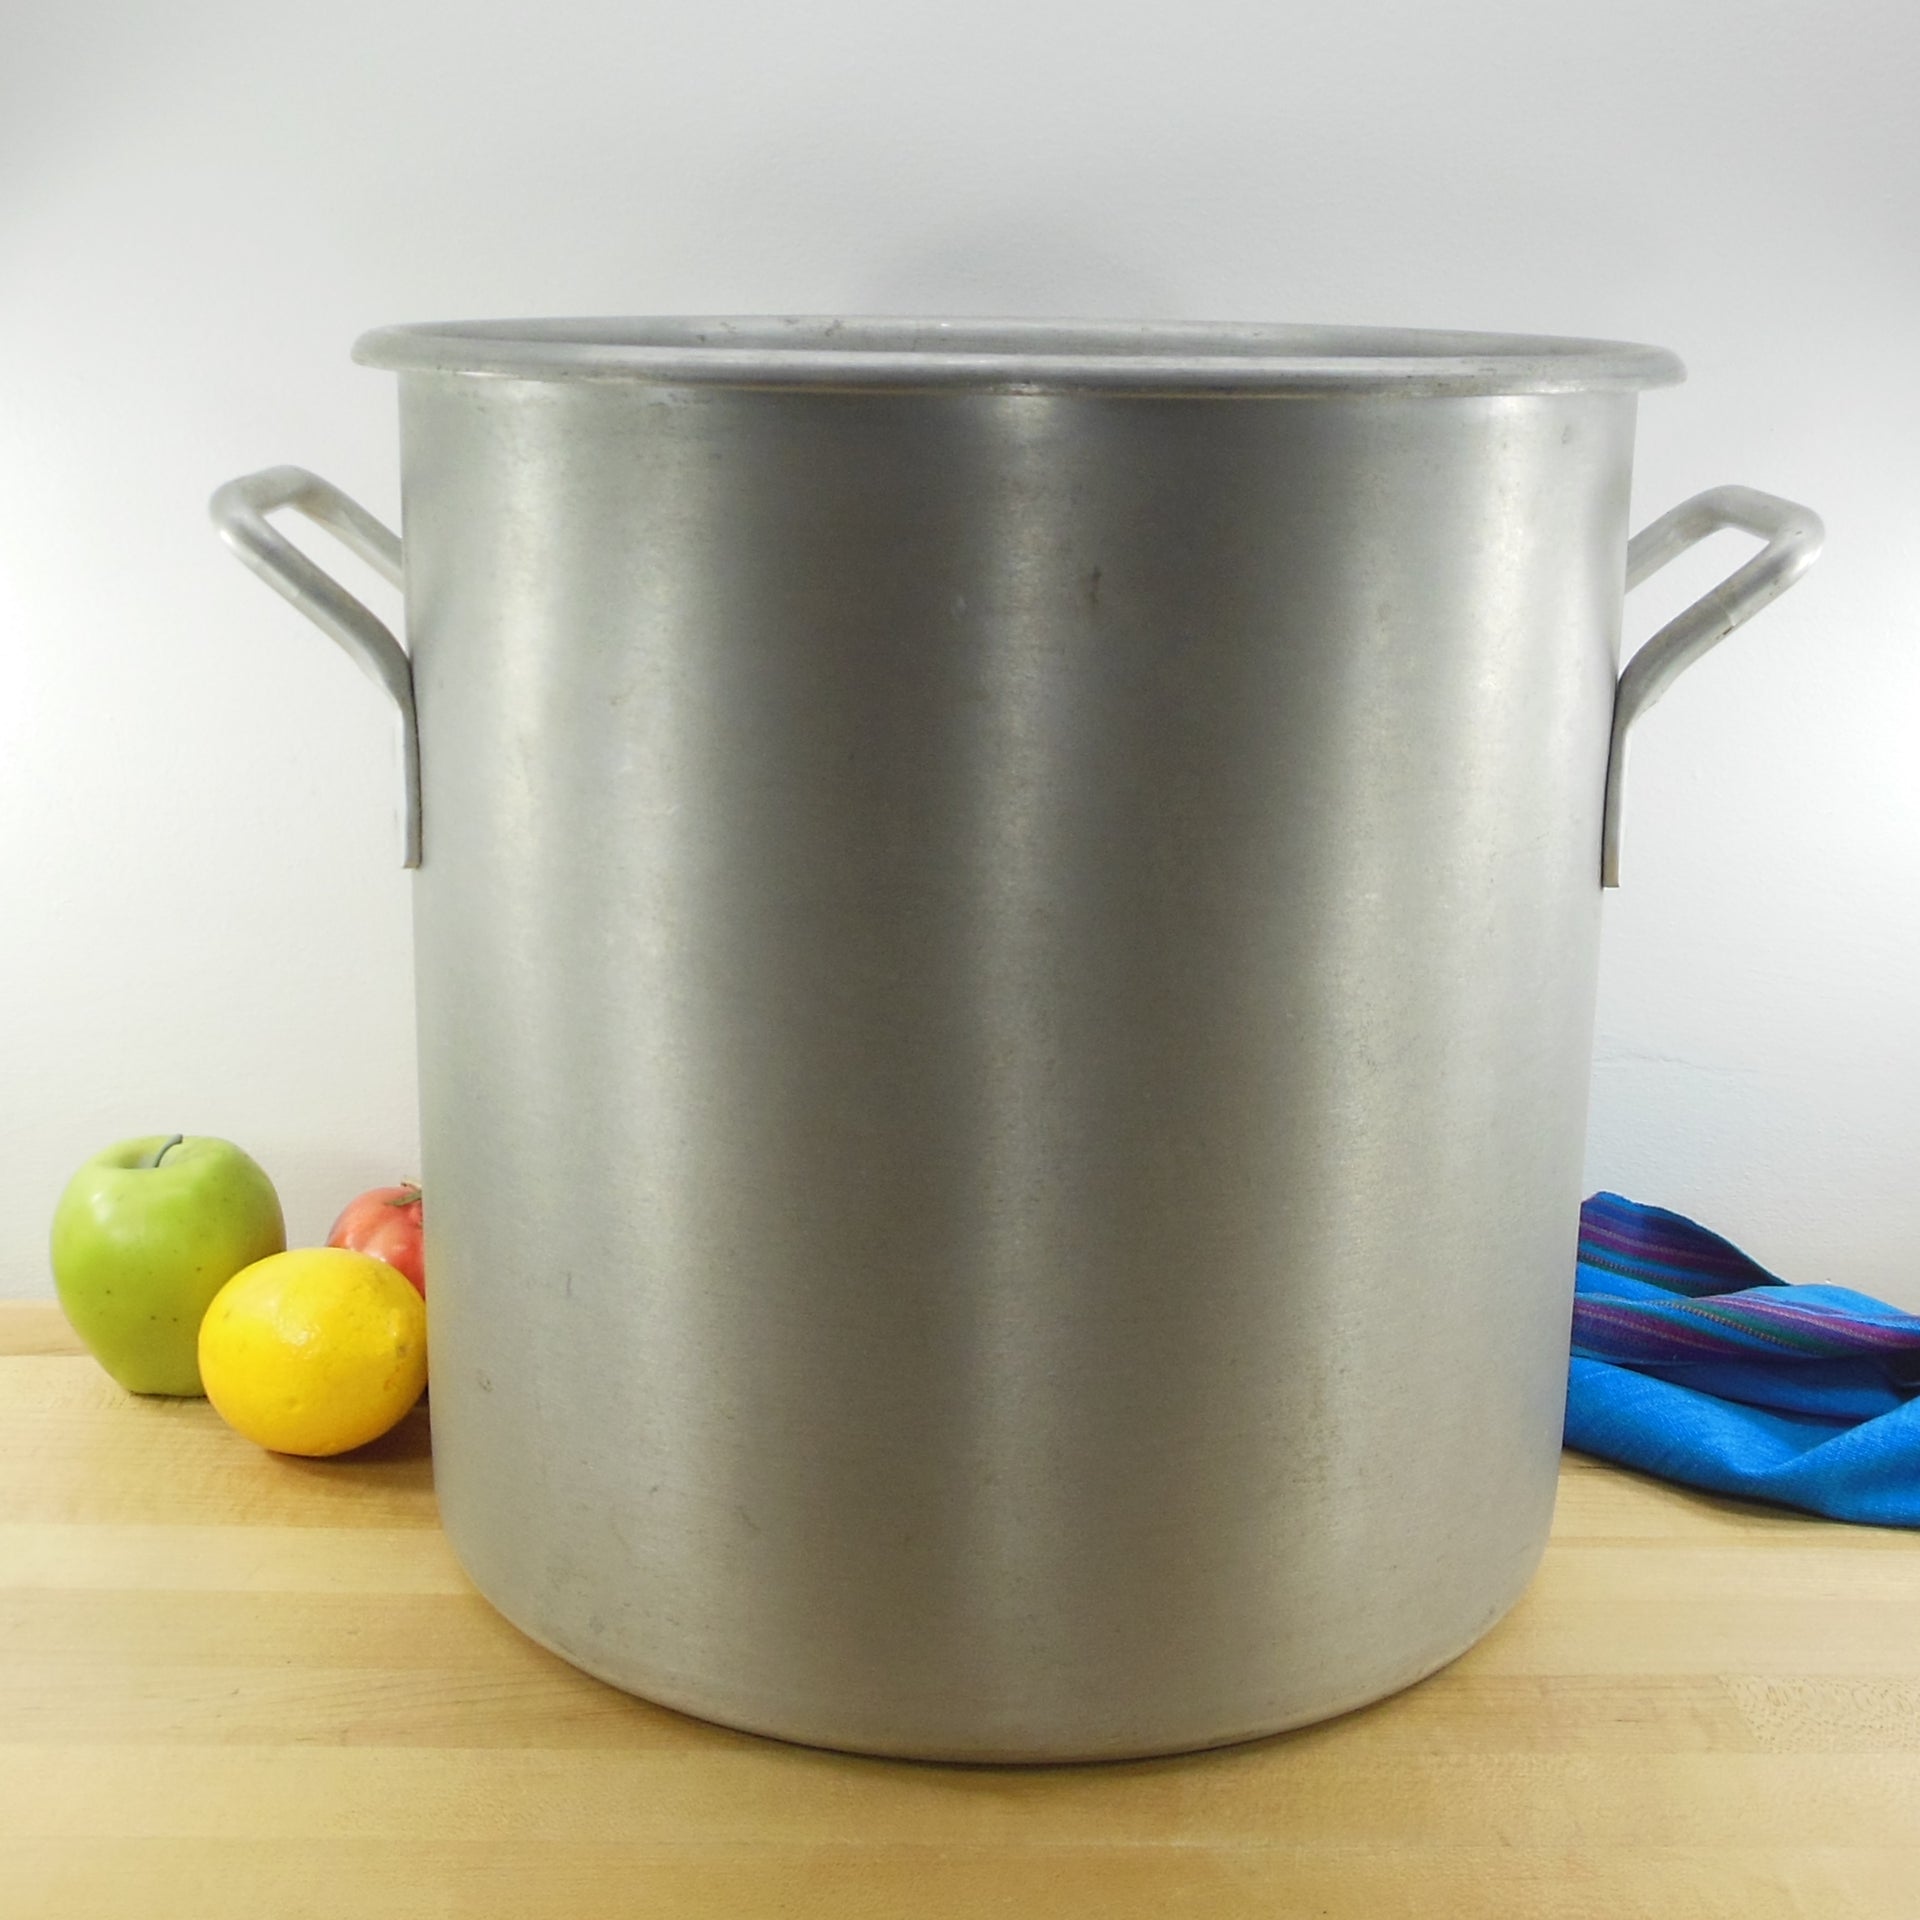 Vintage Wear-ever 3-quart Aluminum Cooking Pot With Lid 753 -  Norway